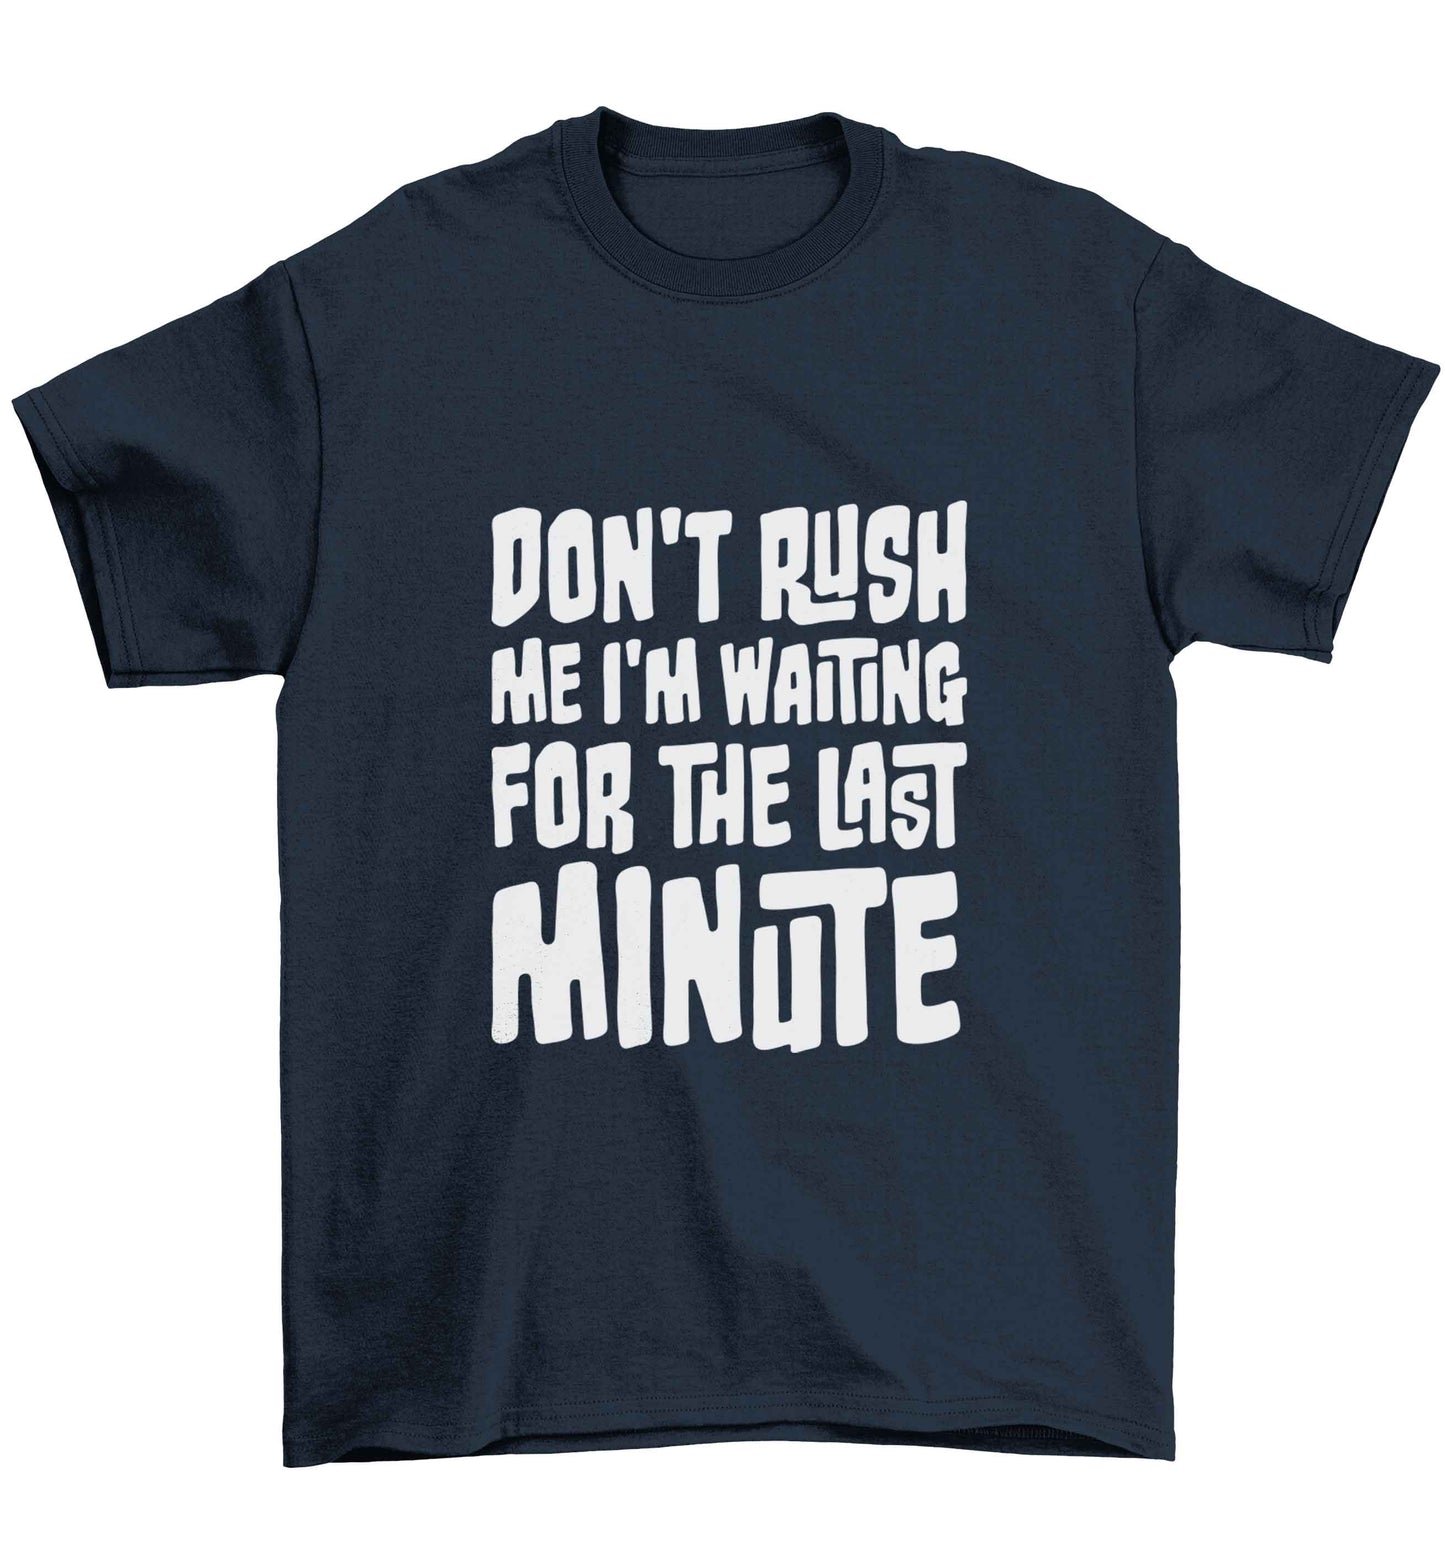 Don't rush me I'm waiting for the last minute Children's navy Tshirt 12-13 Years